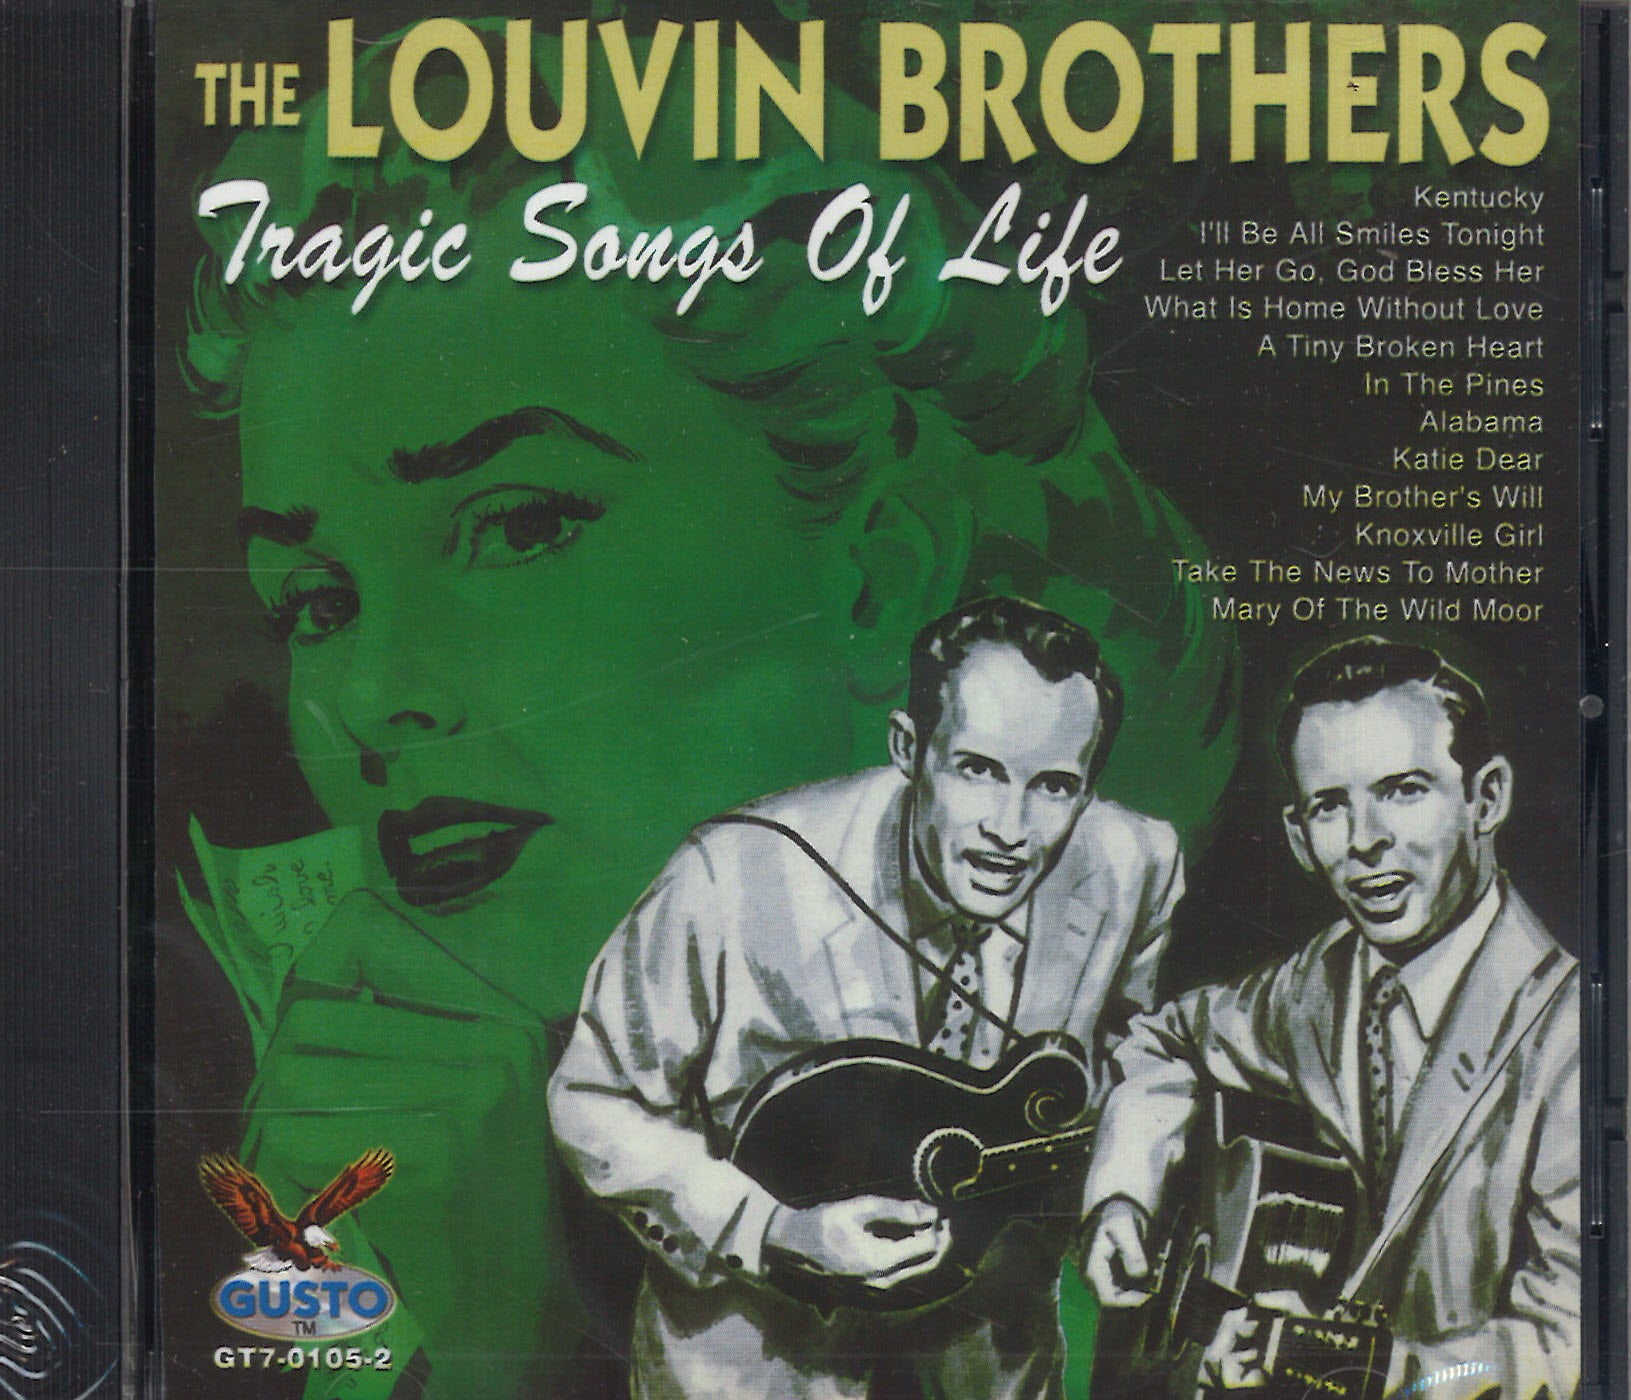 The Louvin Brothers Tragic Songs Of Life